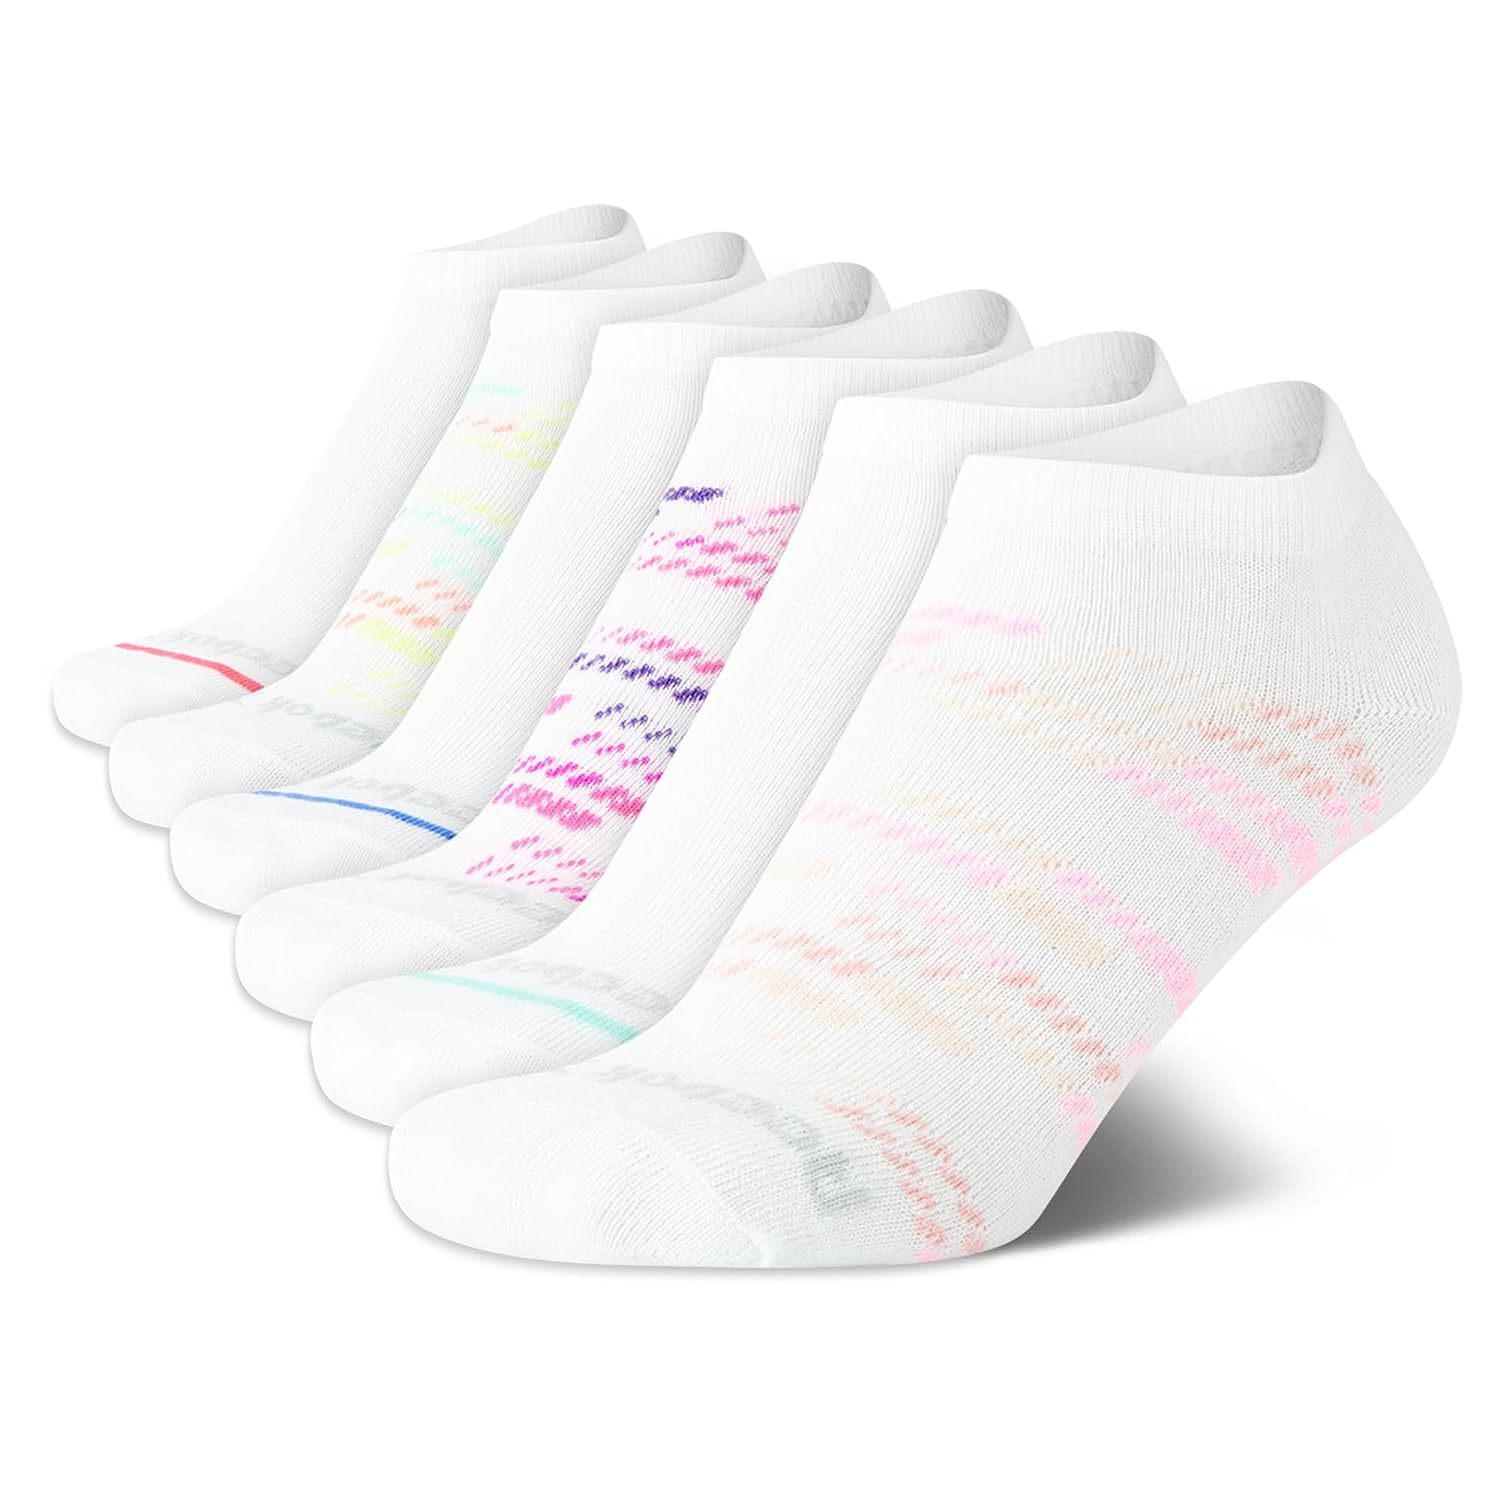 Primary image for Reebok Women's Athletic Socks  Performance Low Cut Socks (6 Pack), Size 4-10, Wh